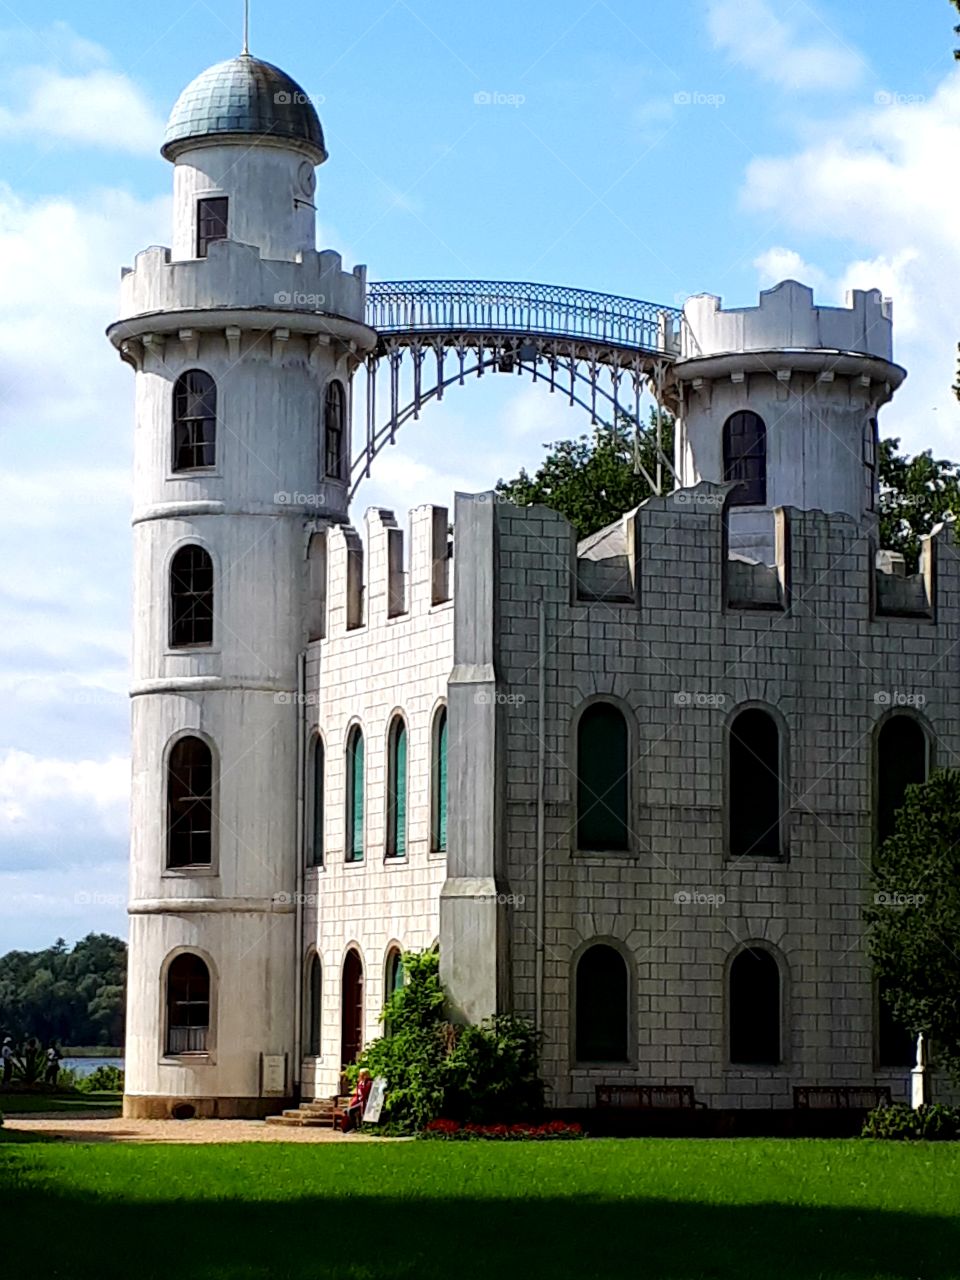 The Pfaueninsel castle on the eponymous peacock island in the Havel near Berlin is a pleasure palace built for the Prussian King Frederick William II at the end of the 18th century.